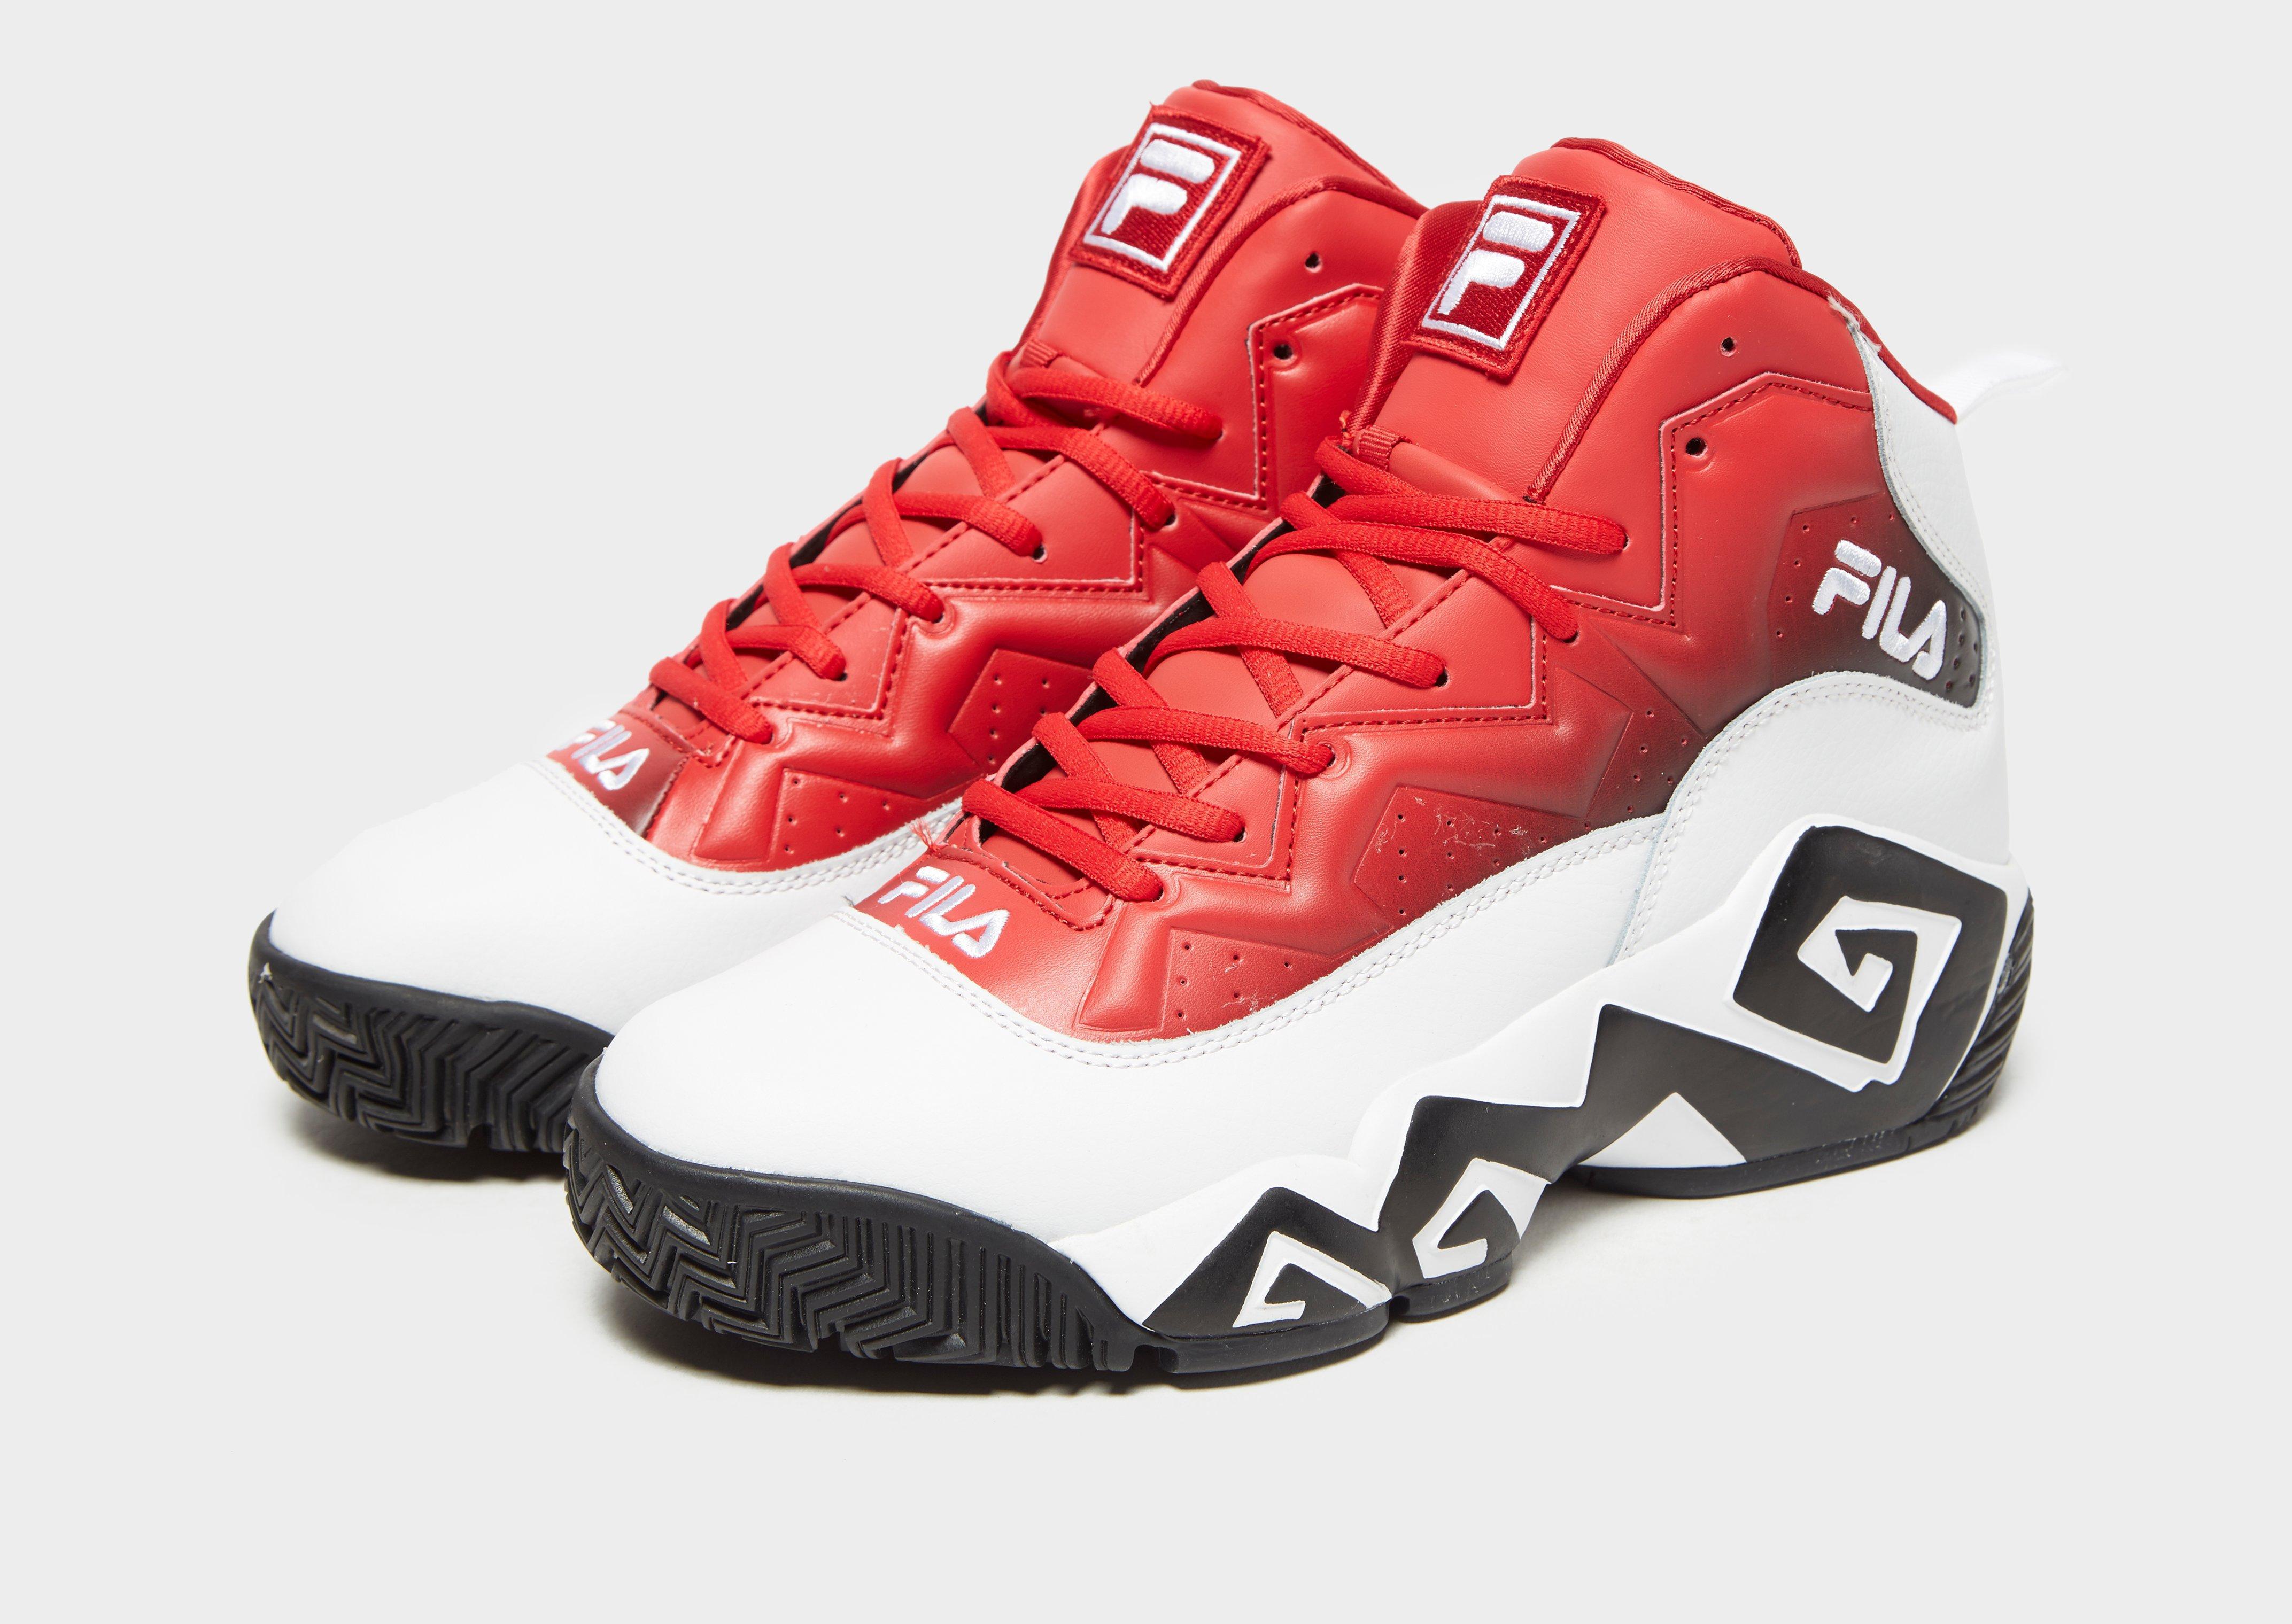 Fila Leather Mb Fade in White/Red/Black (Red) for Men - Lyst